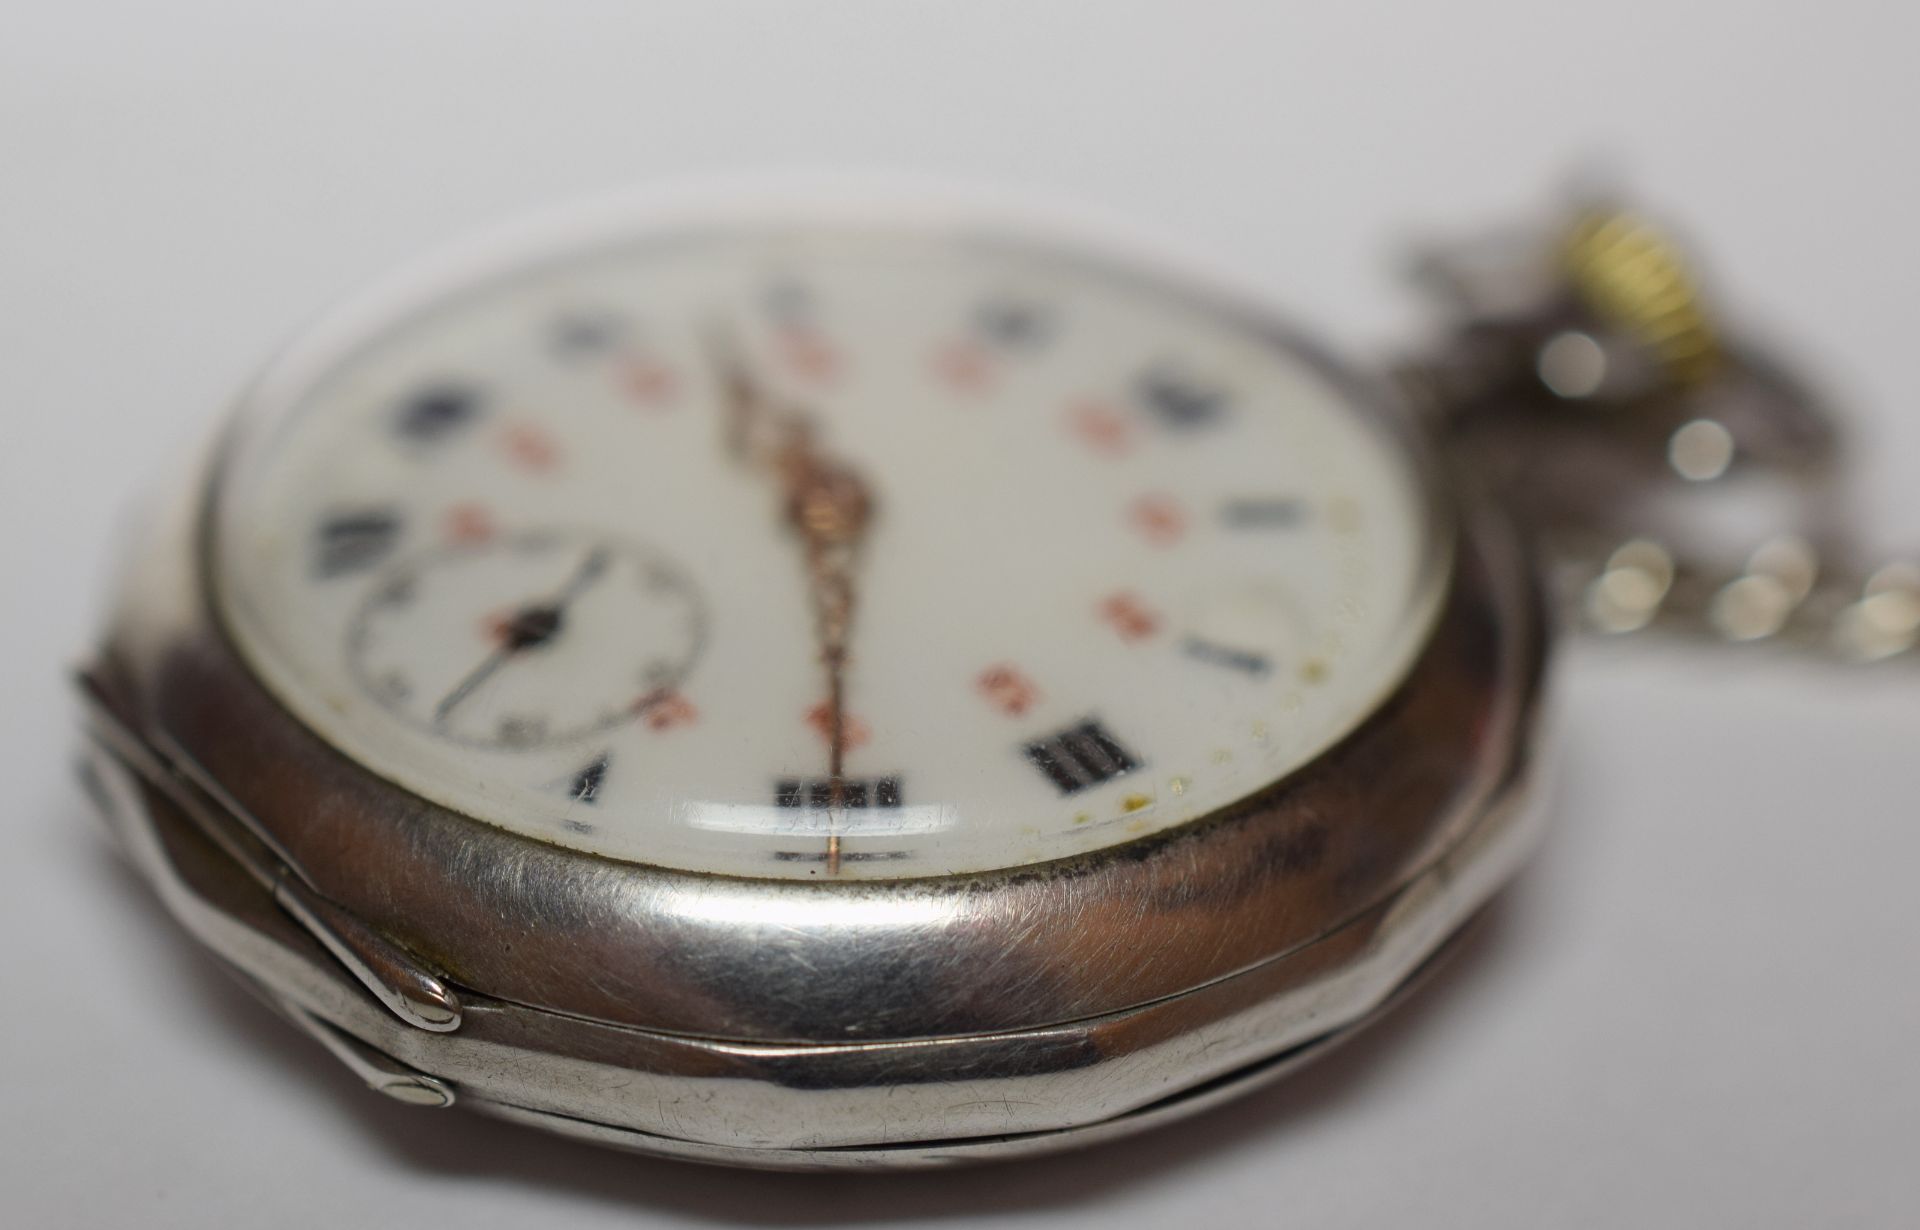 Silver Cased French Pocket Watch With Movement Signed C.Crettiez On Display Stand - Image 9 of 9